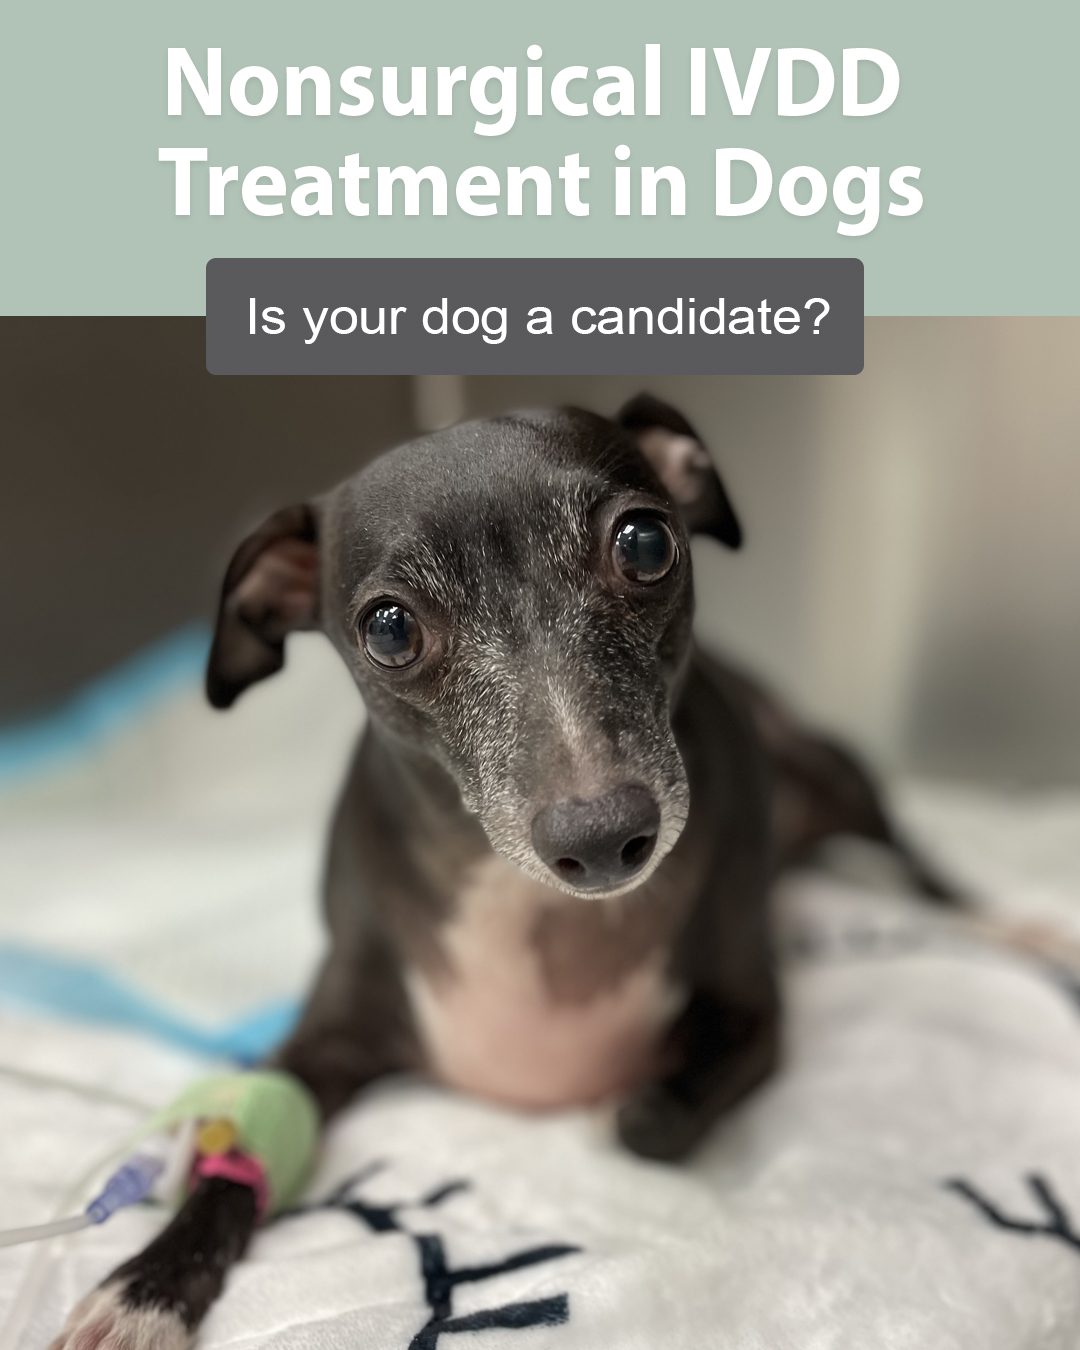 Nonsurgical IVDD Treatment in Dogs: Is Your Dog a Candidate?